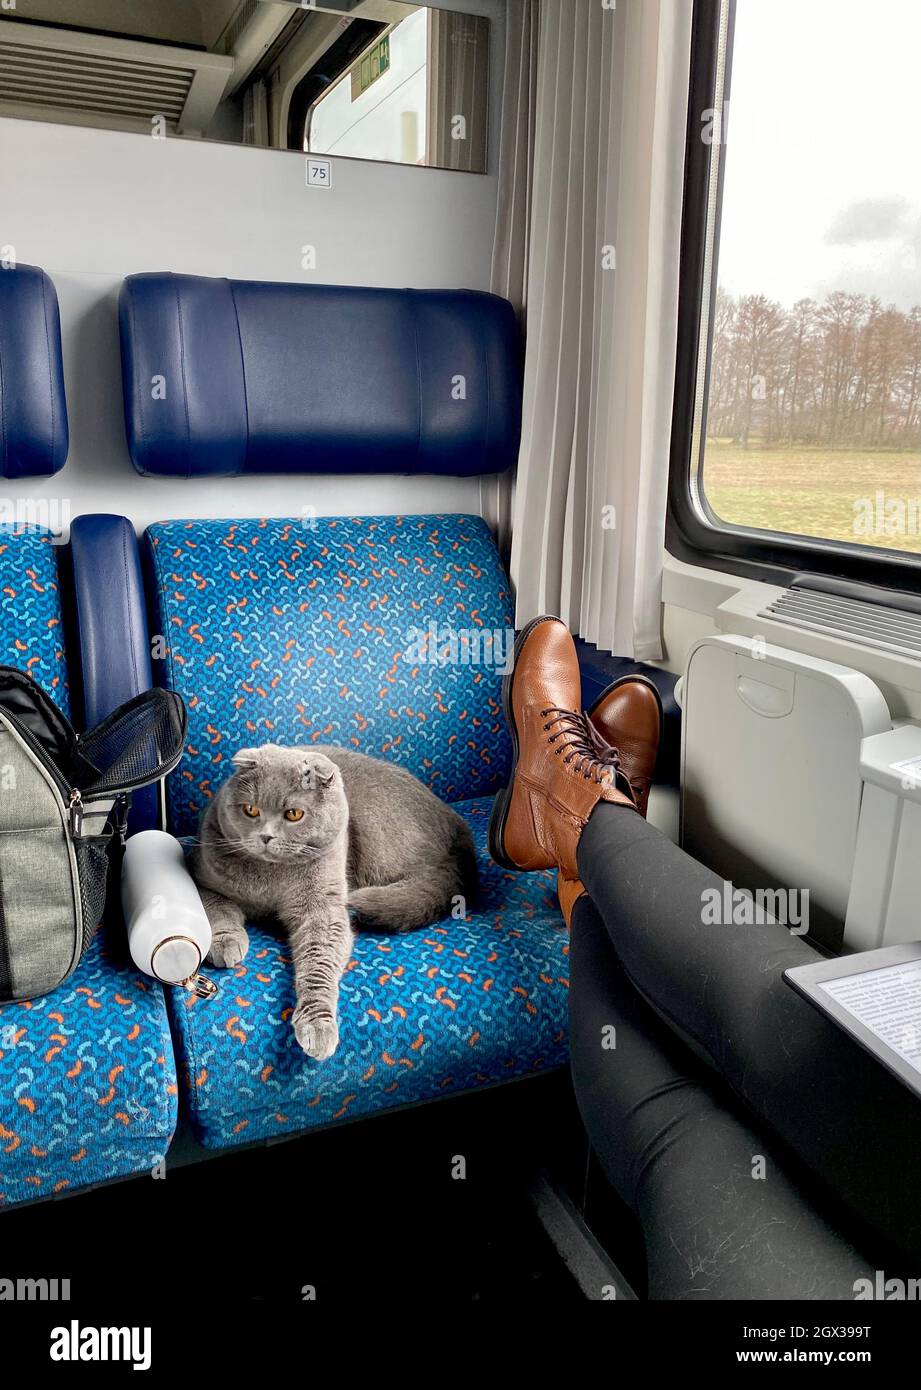 High Angle View Of Cat Sitting In Train Stock Photo - Alamy